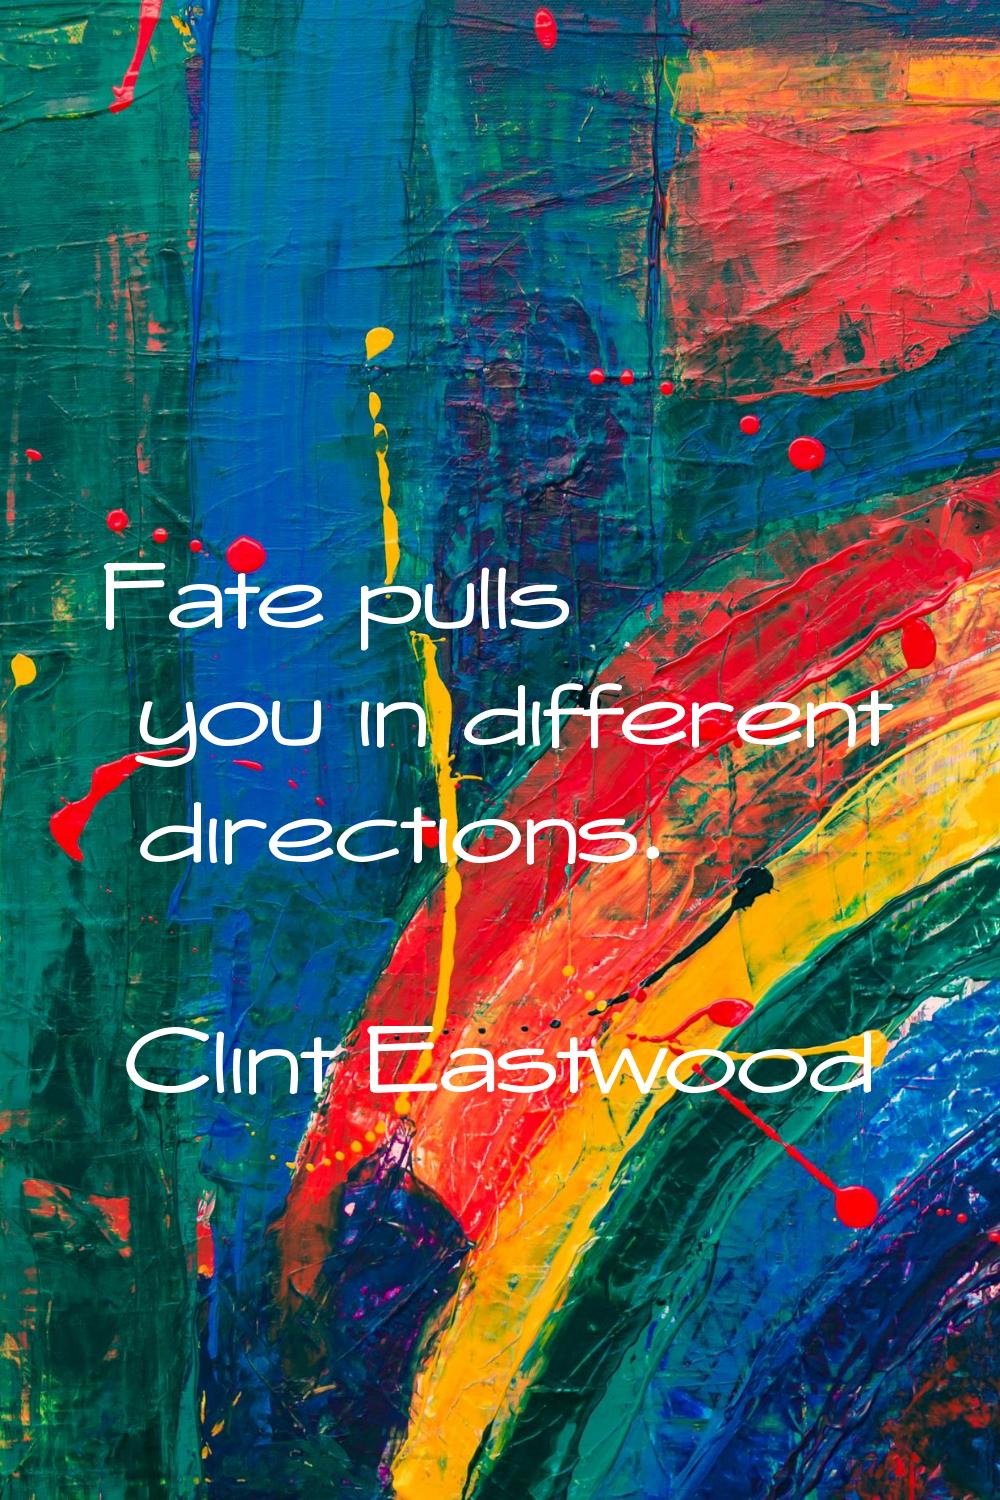 Fate pulls you in different directions.